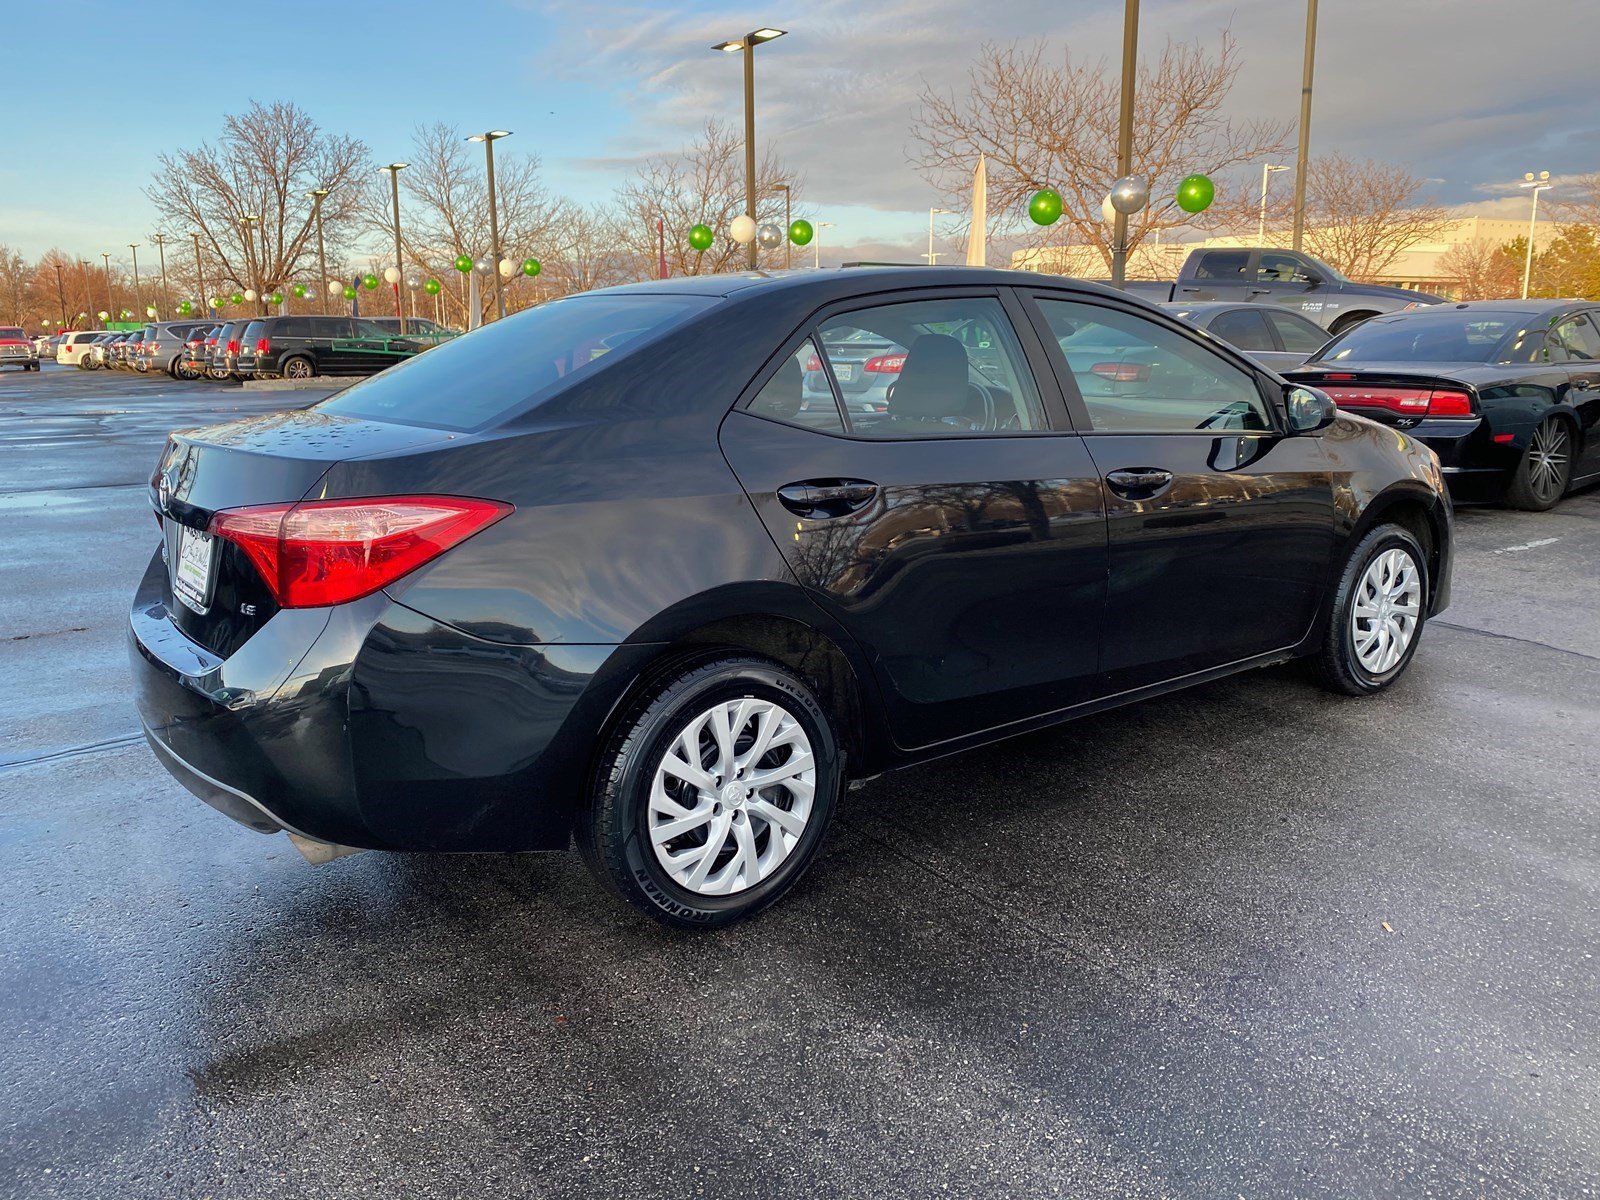 PreOwned 2018 Toyota Corolla L 4dr Car in Sandy S7528